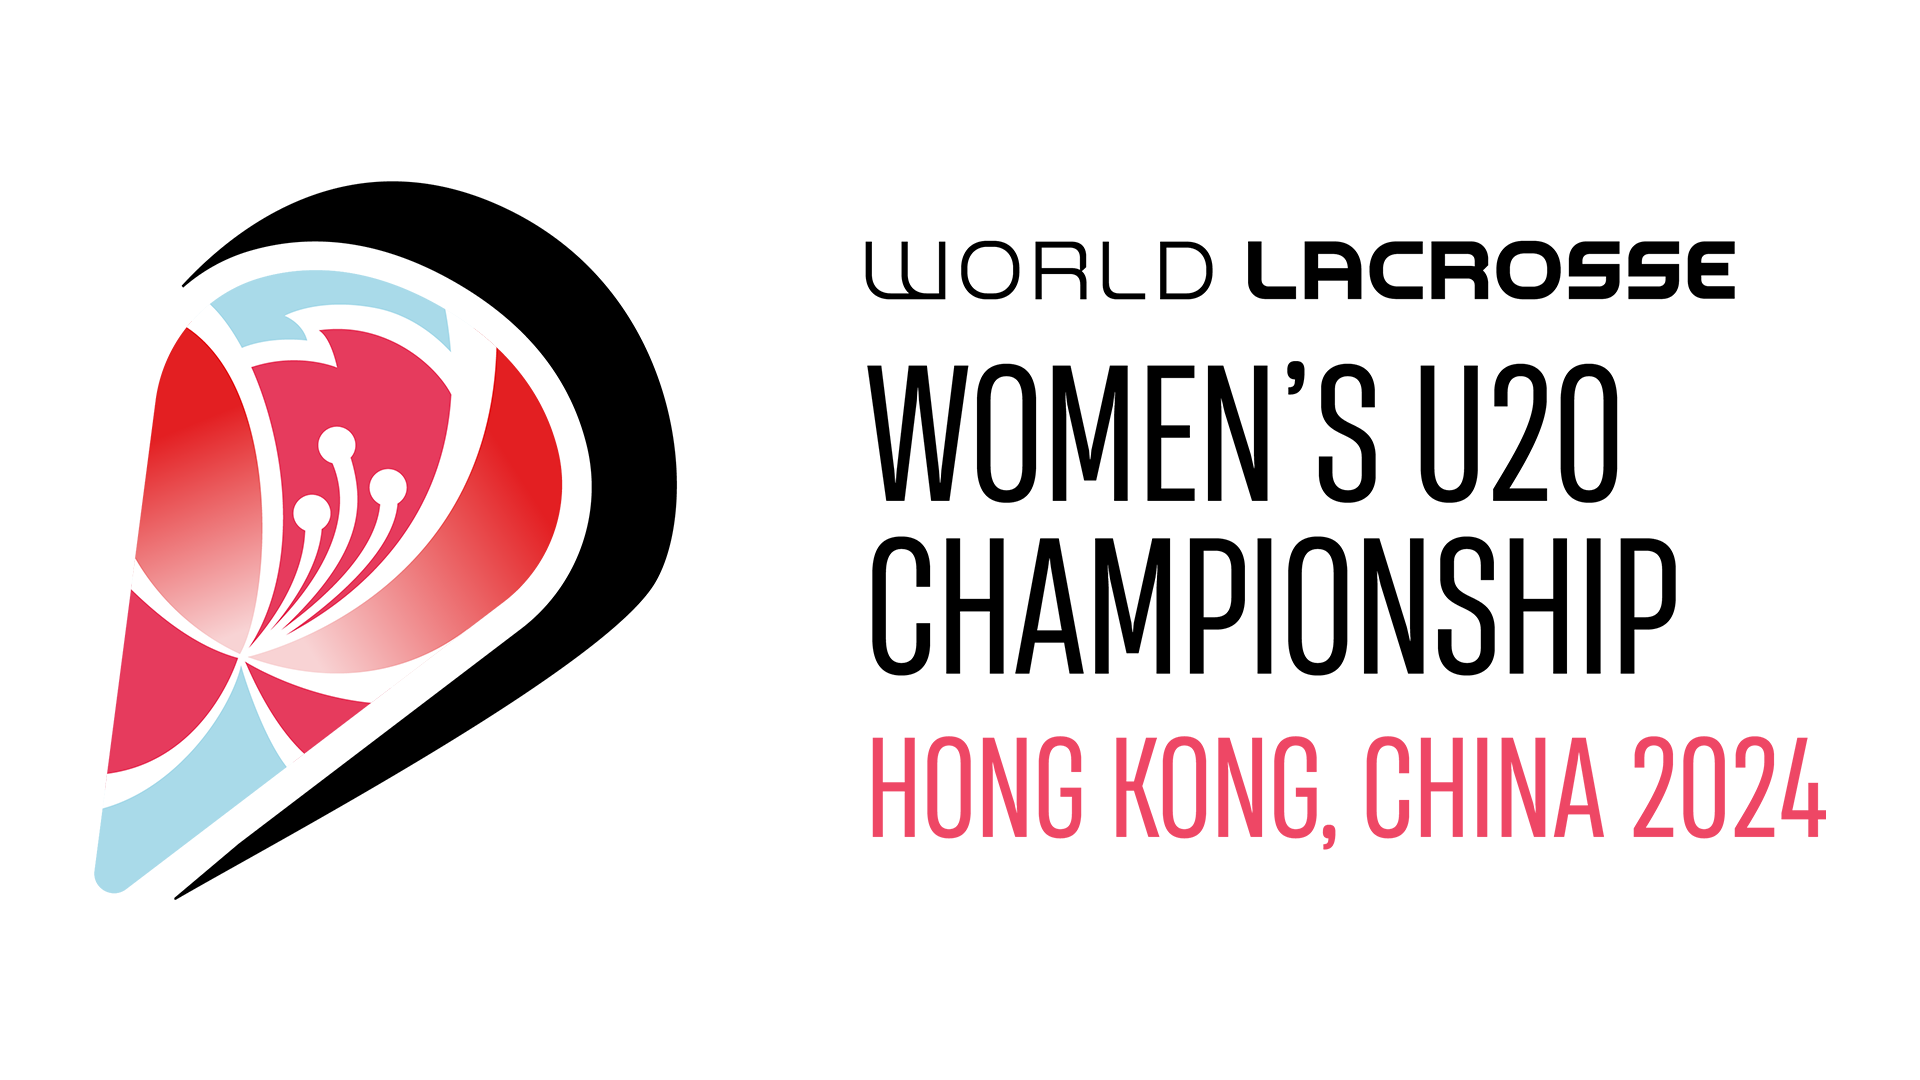 Behind the logo for the 2024 Women's U20 Championship World Lacrosse